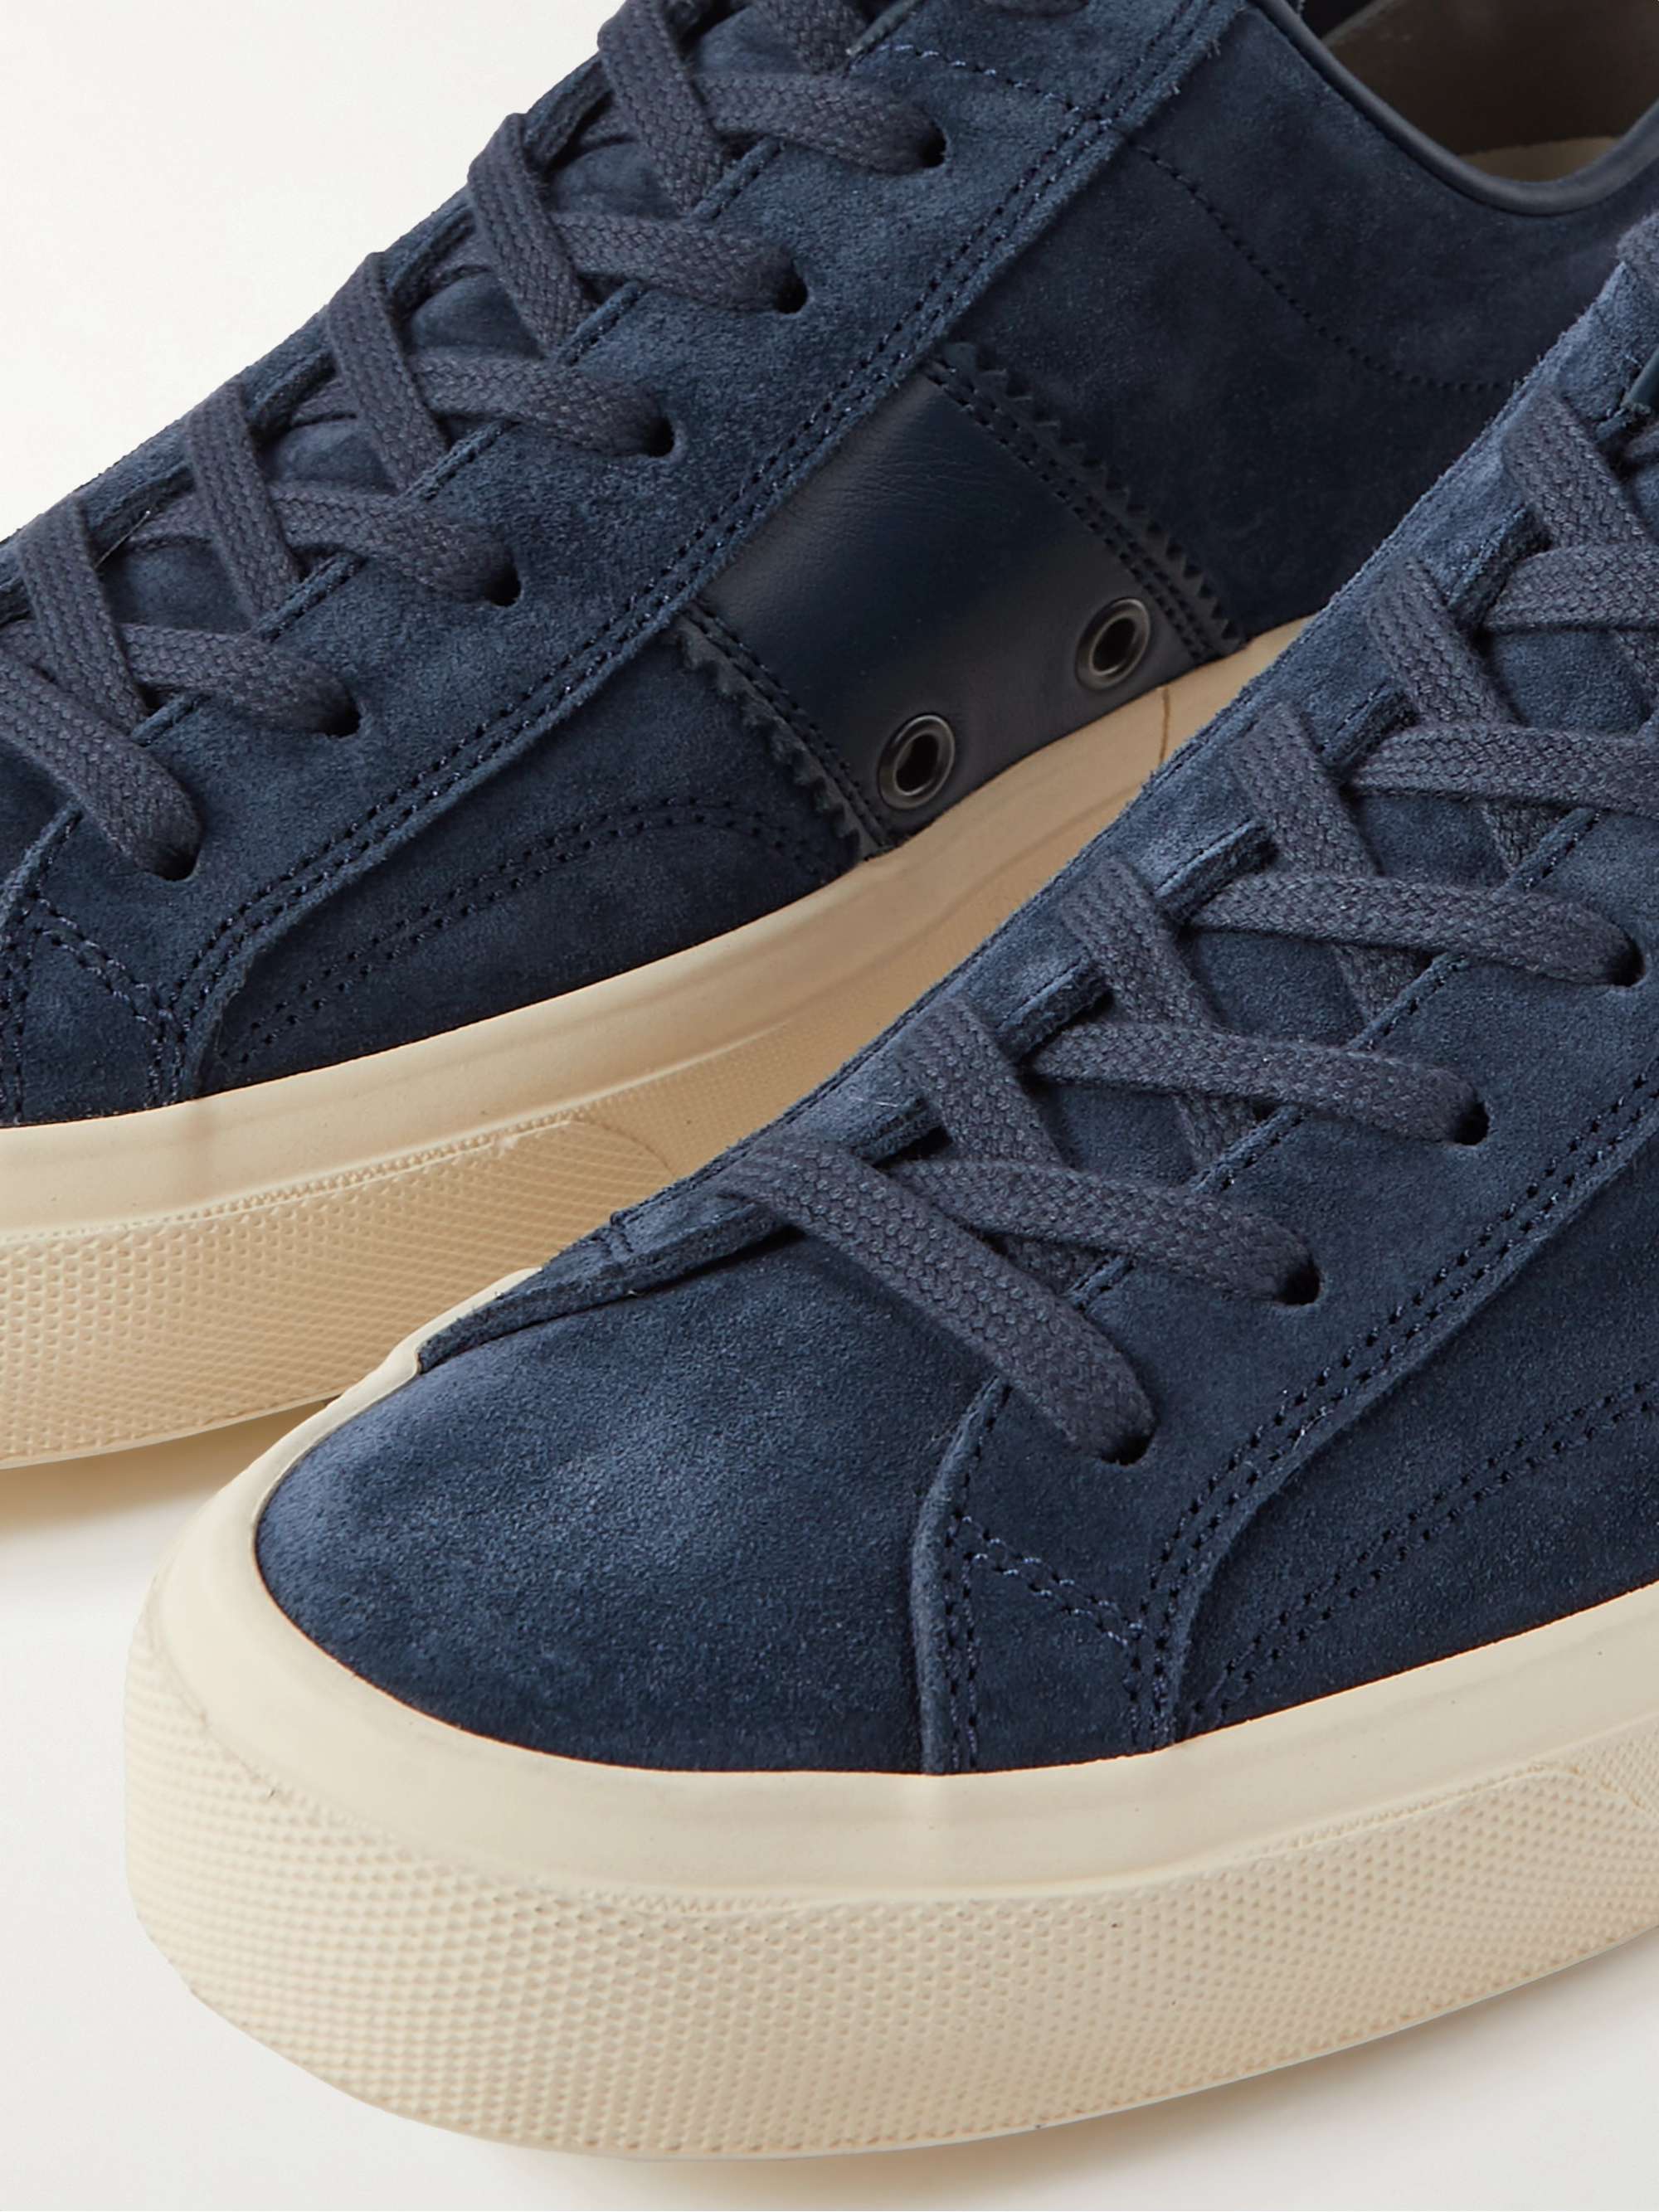 Cambridge Leather-Trimmed Suede Sneakers